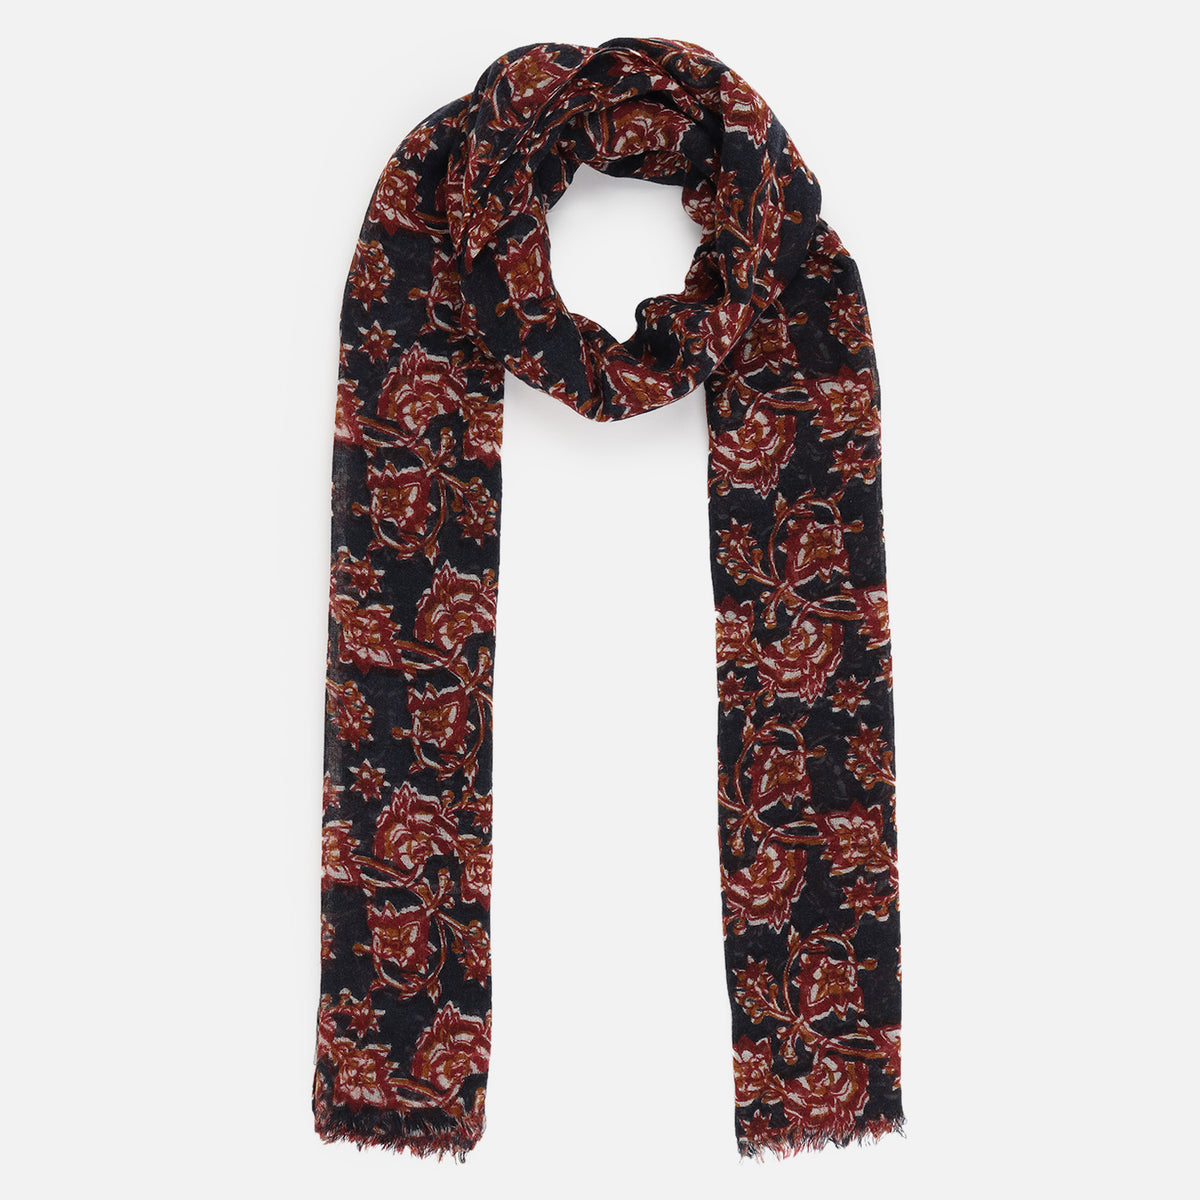 Floral printed woolen stole